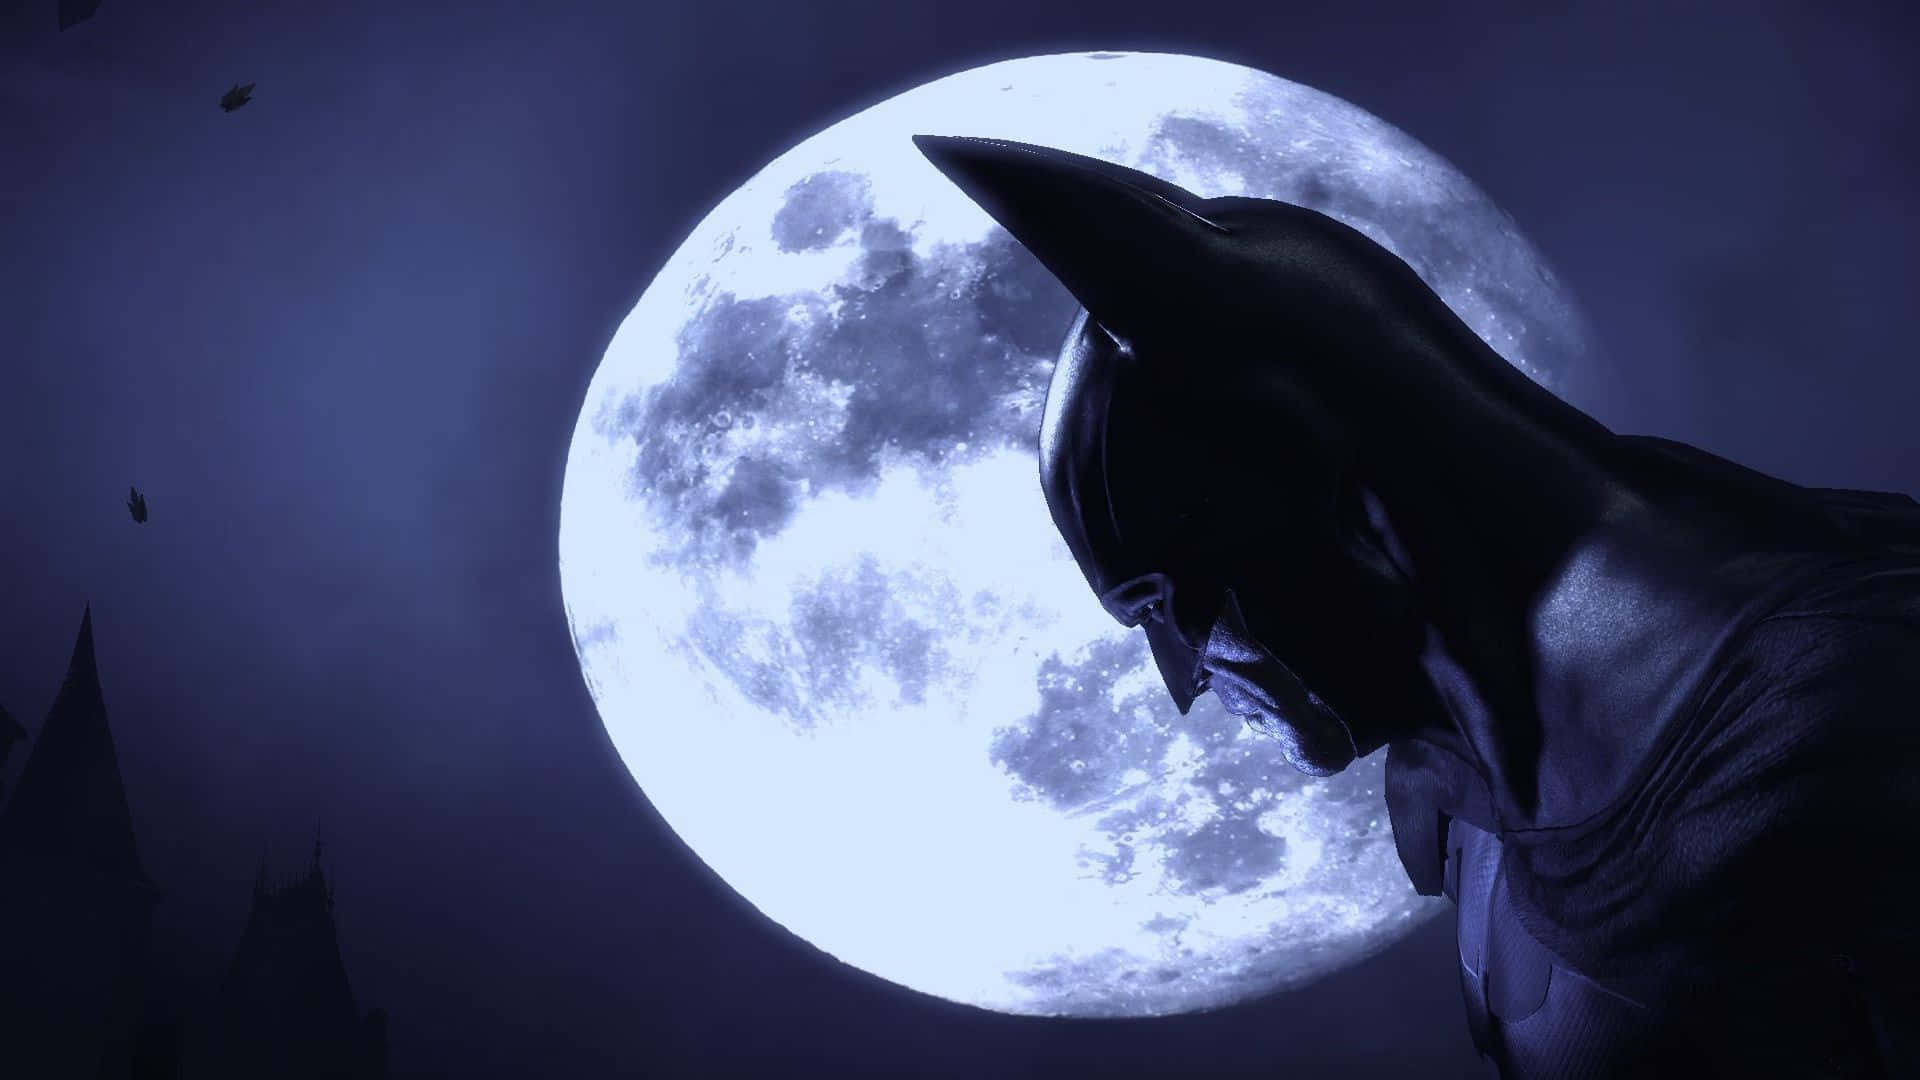 Batman Laptop Dutch Angle With Full Moon Background Wallpaper